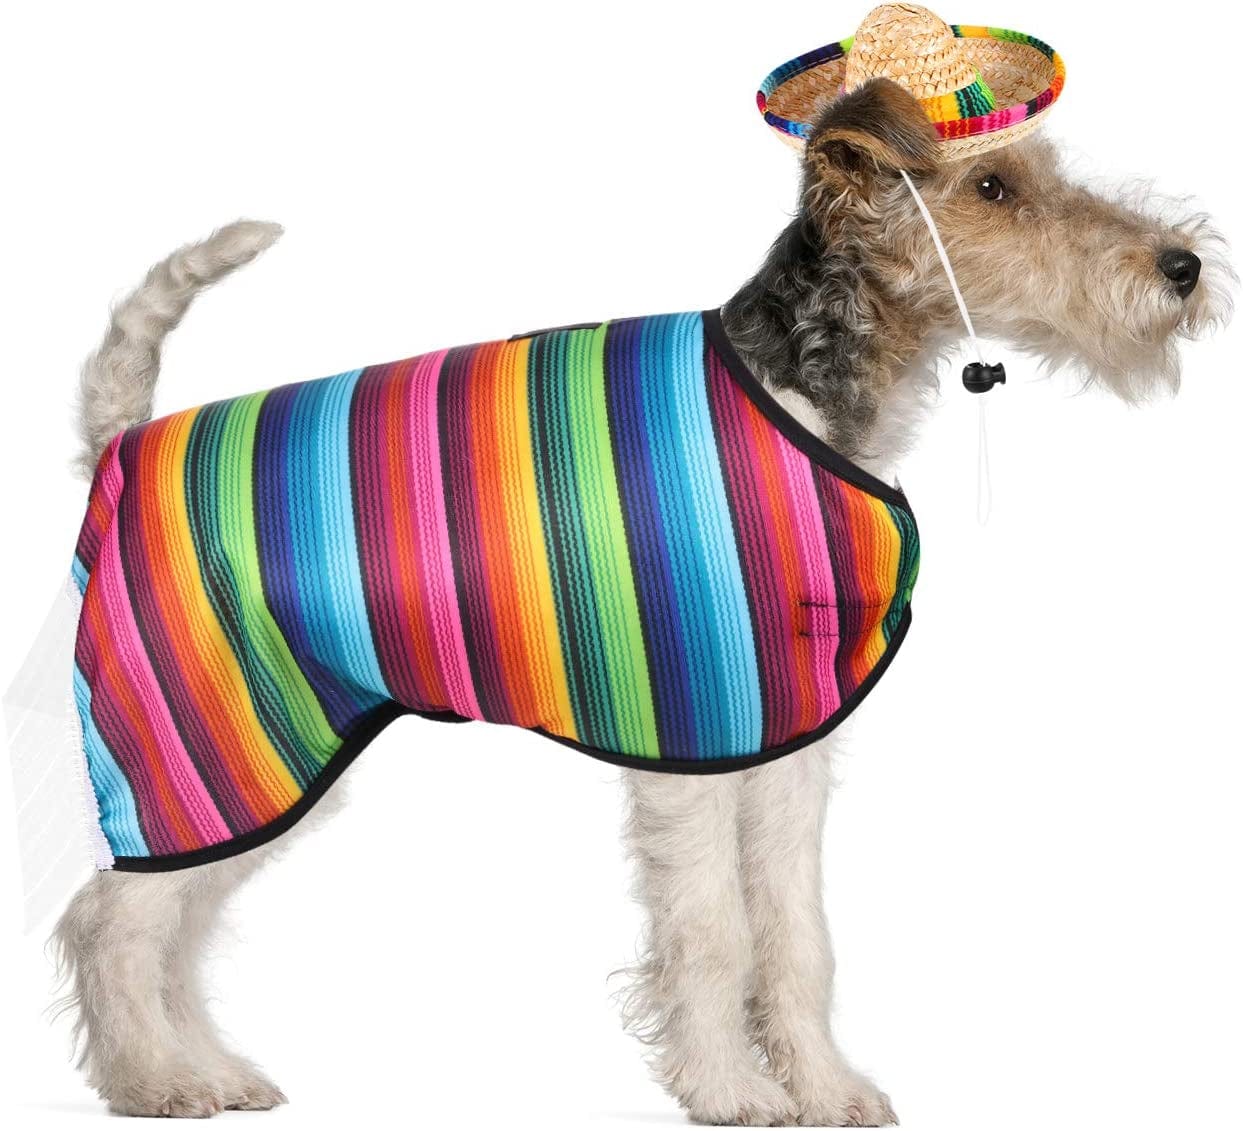 https://kol.pet/cdn/shop/products/dog-sombrero-hat-pet-serape-poncho-costume-multicolor-funny-dog-costume-adjustable-sombrero-costume-mexican-dog-poncho-straw-hat-chihuahua-clothes-for-mexican-party-decorations-m-4055_68b0ed6c-40ec-4e57-bc4d-8c7e47321e51_1946x.jpg?v=1675707134